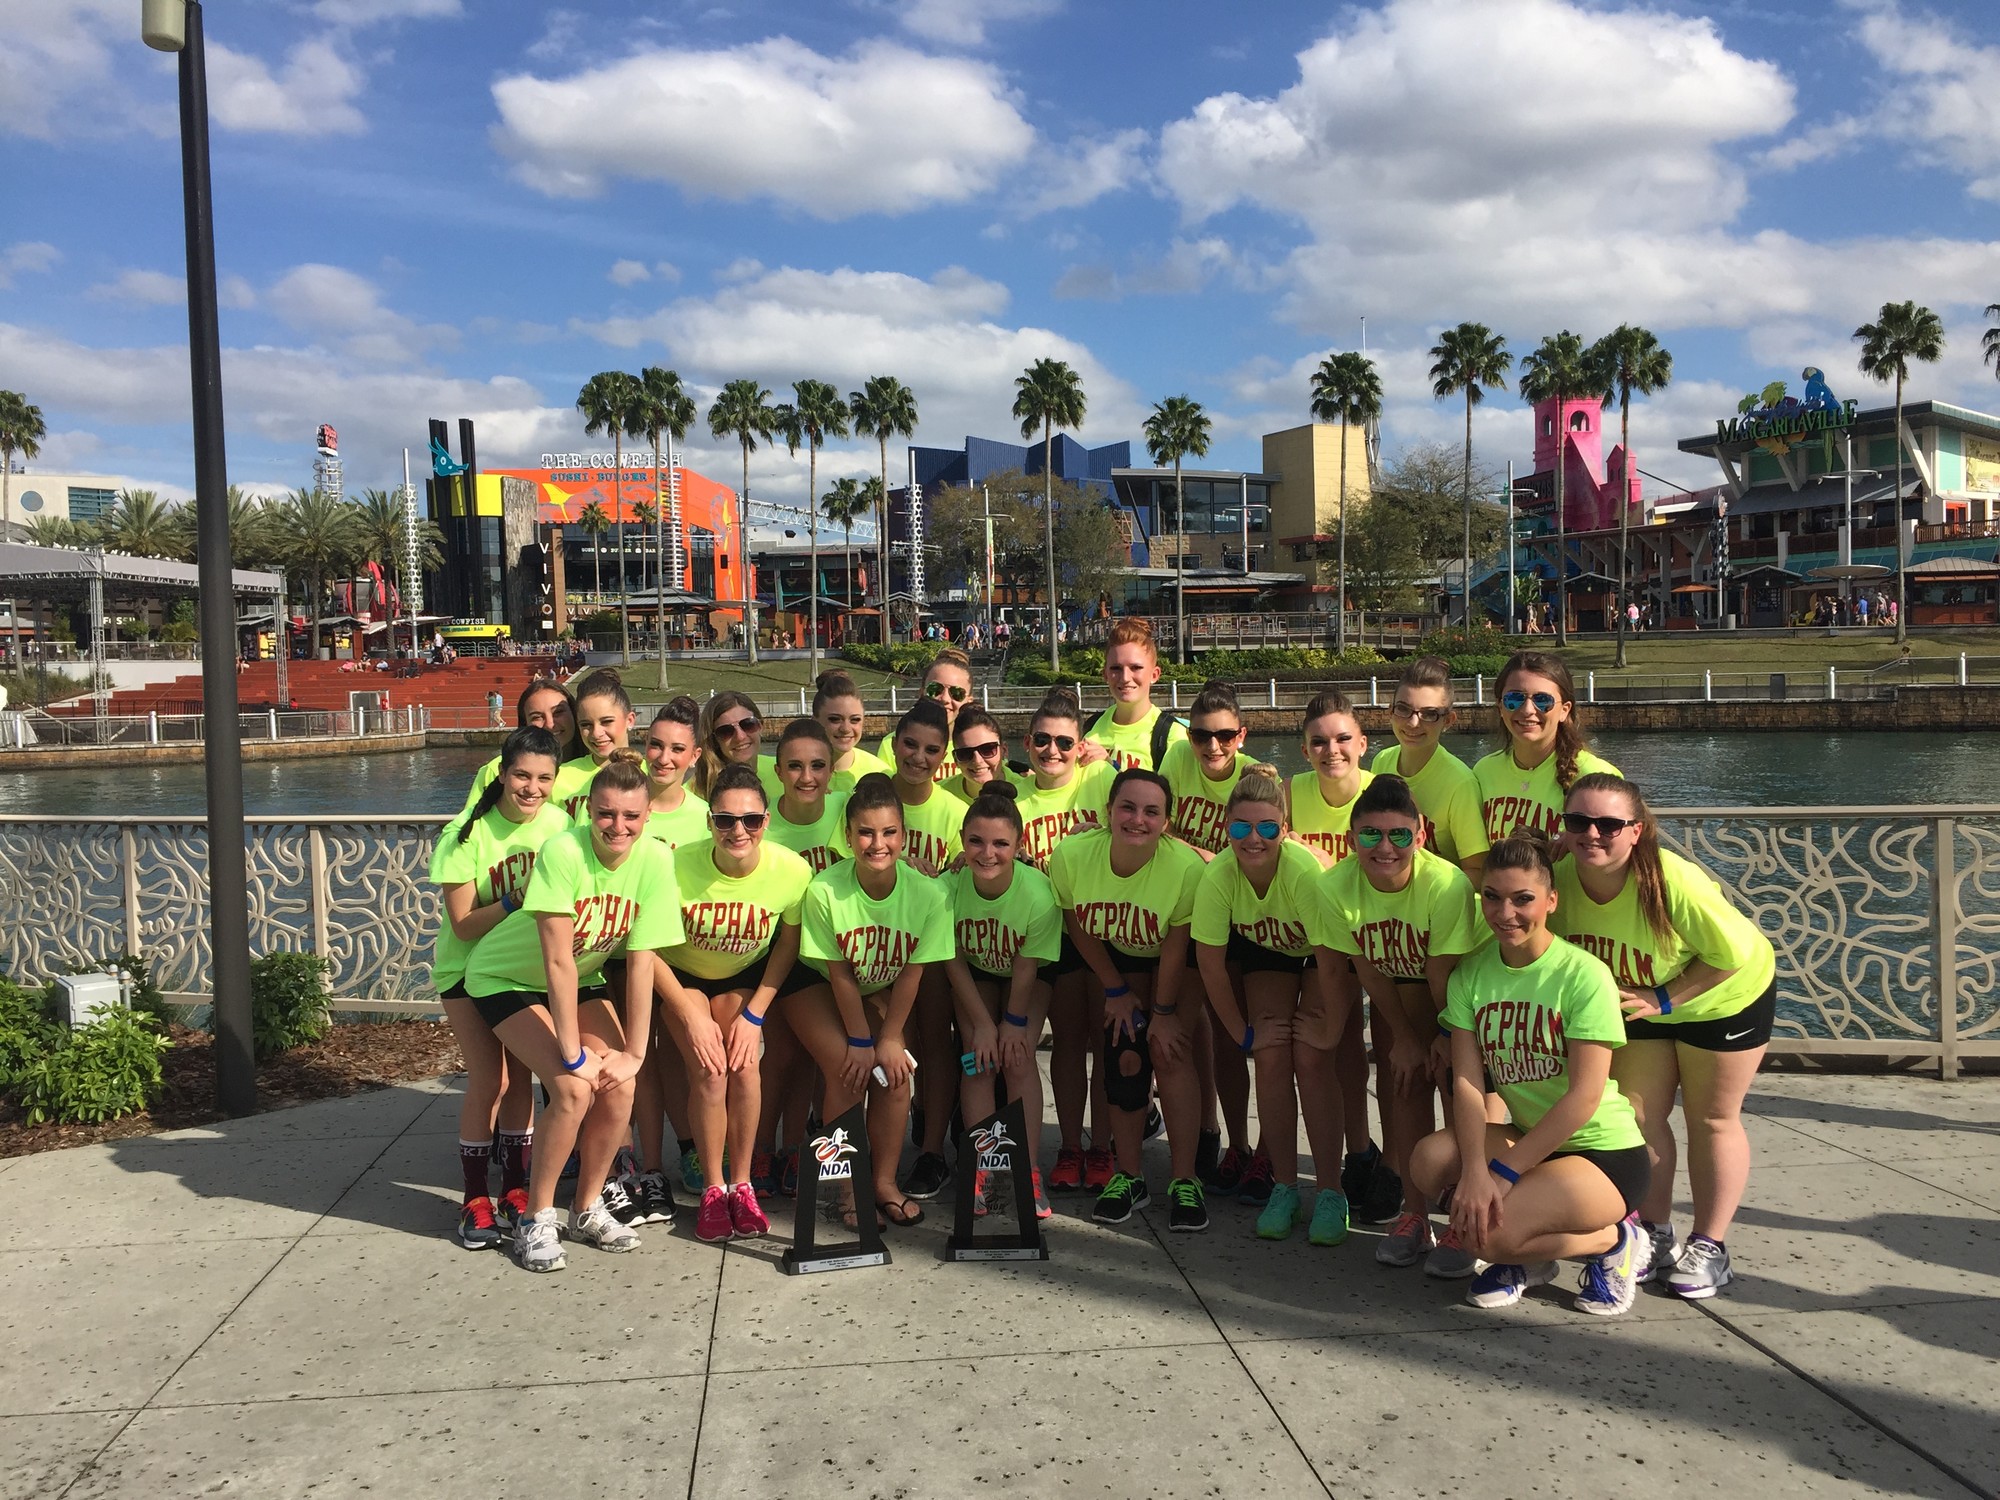 The Mepham High School kickline team, the Pirettes, capped another season full of accomplishments at the National Dance Alliance Championship in Florida.